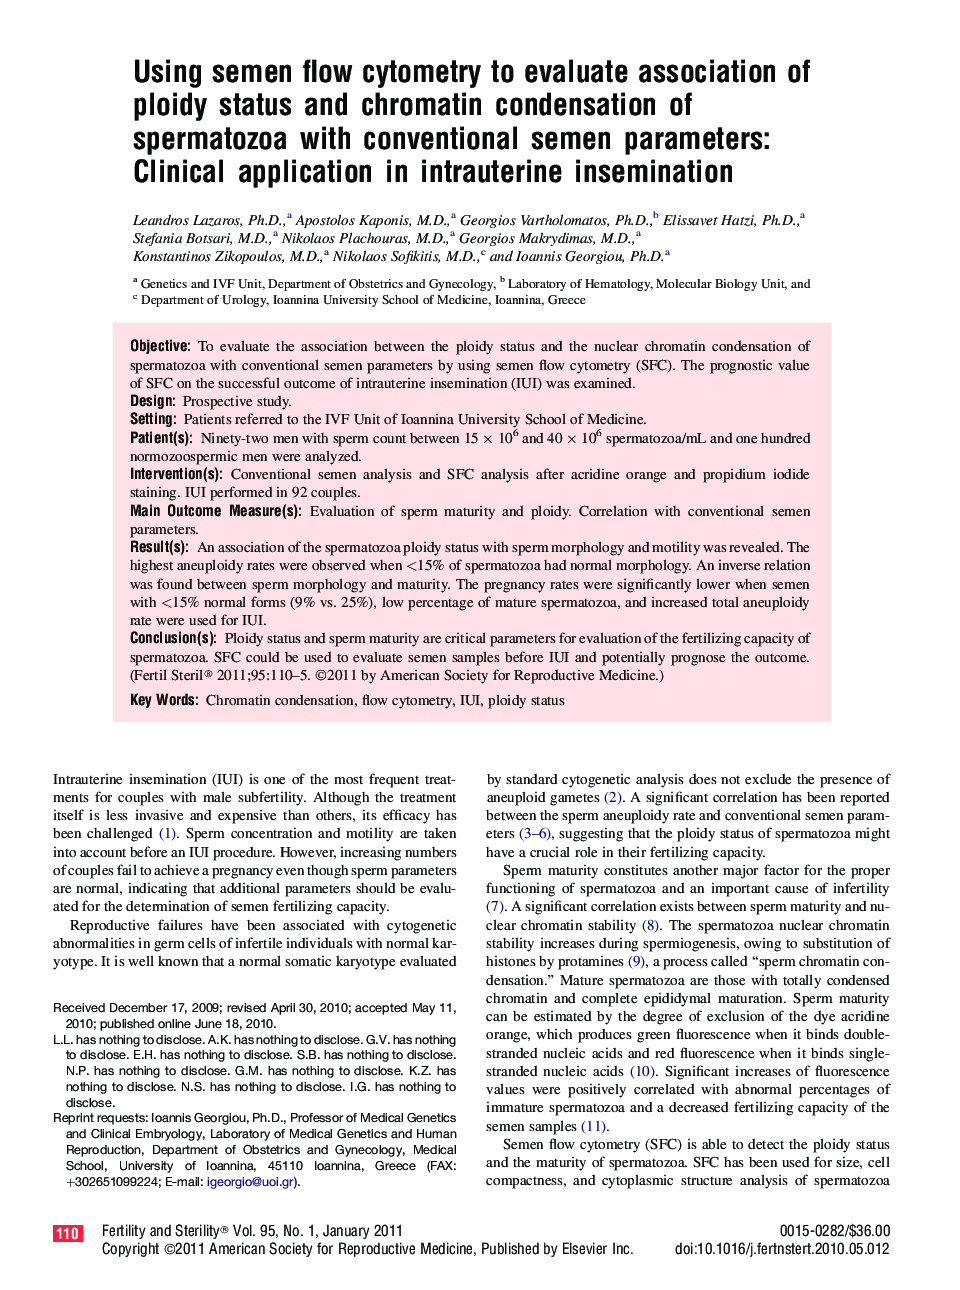 Using semen flow cytometry to evaluate association of ploidy status and chromatin condensation of spermatozoa with conventional semen parameters: Clinical application in intrauterine insemination 